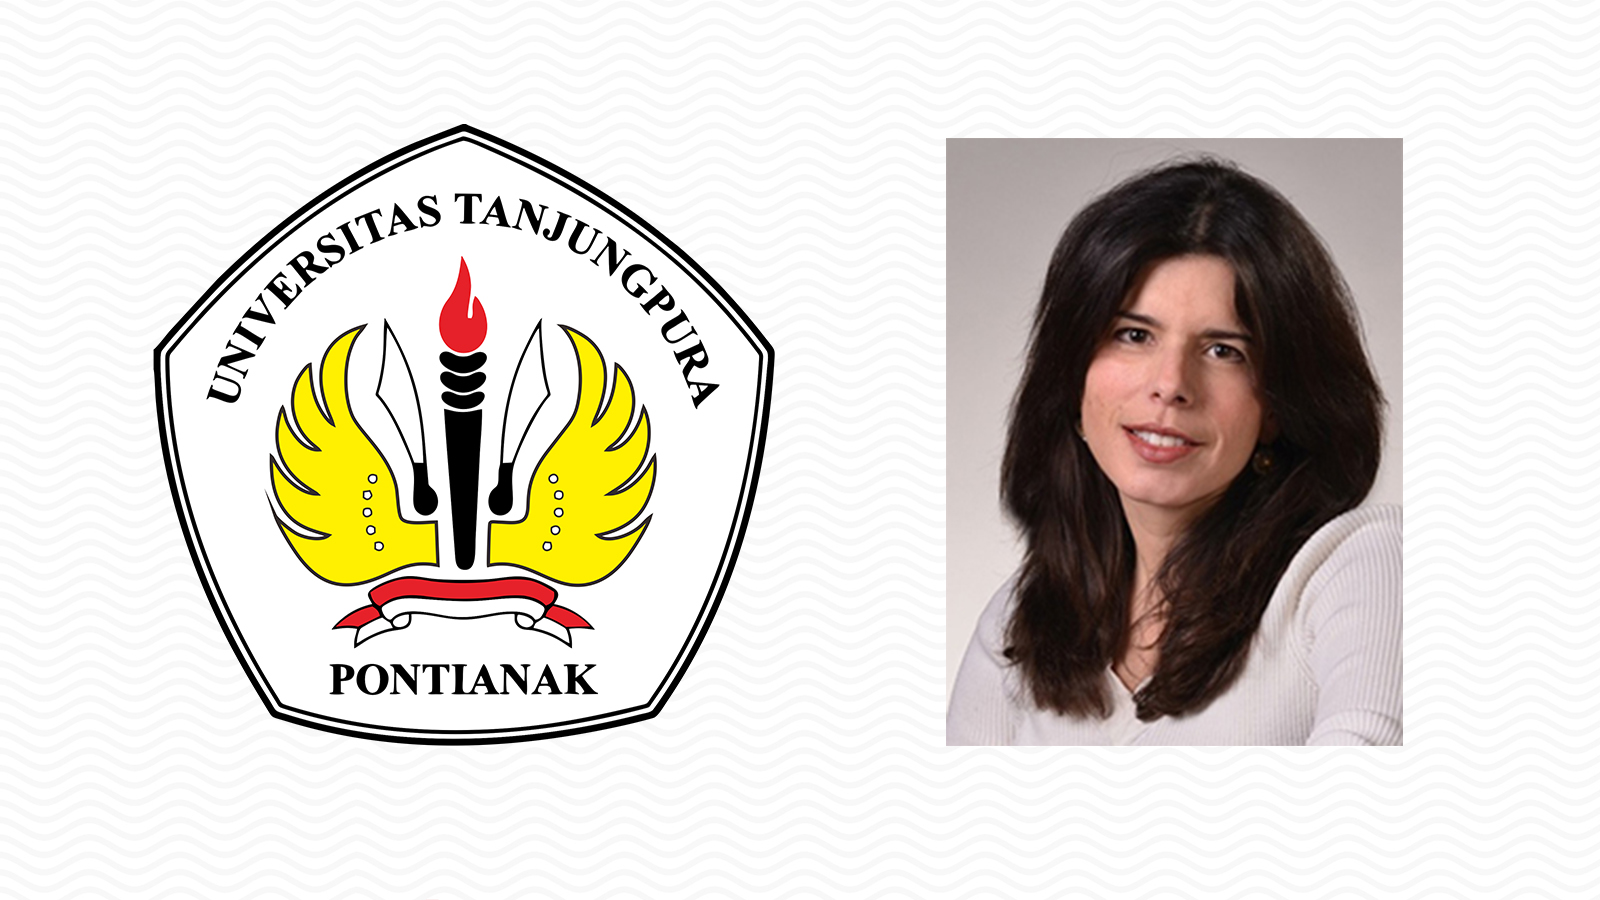 Loukia Sarroub, professor in teaching, learning and teacher education, will present a keynote message at the International Conference of Teaching and Education, Oct. 23-29, at the University of Tanjungpura in Pontianak, Indonesia.